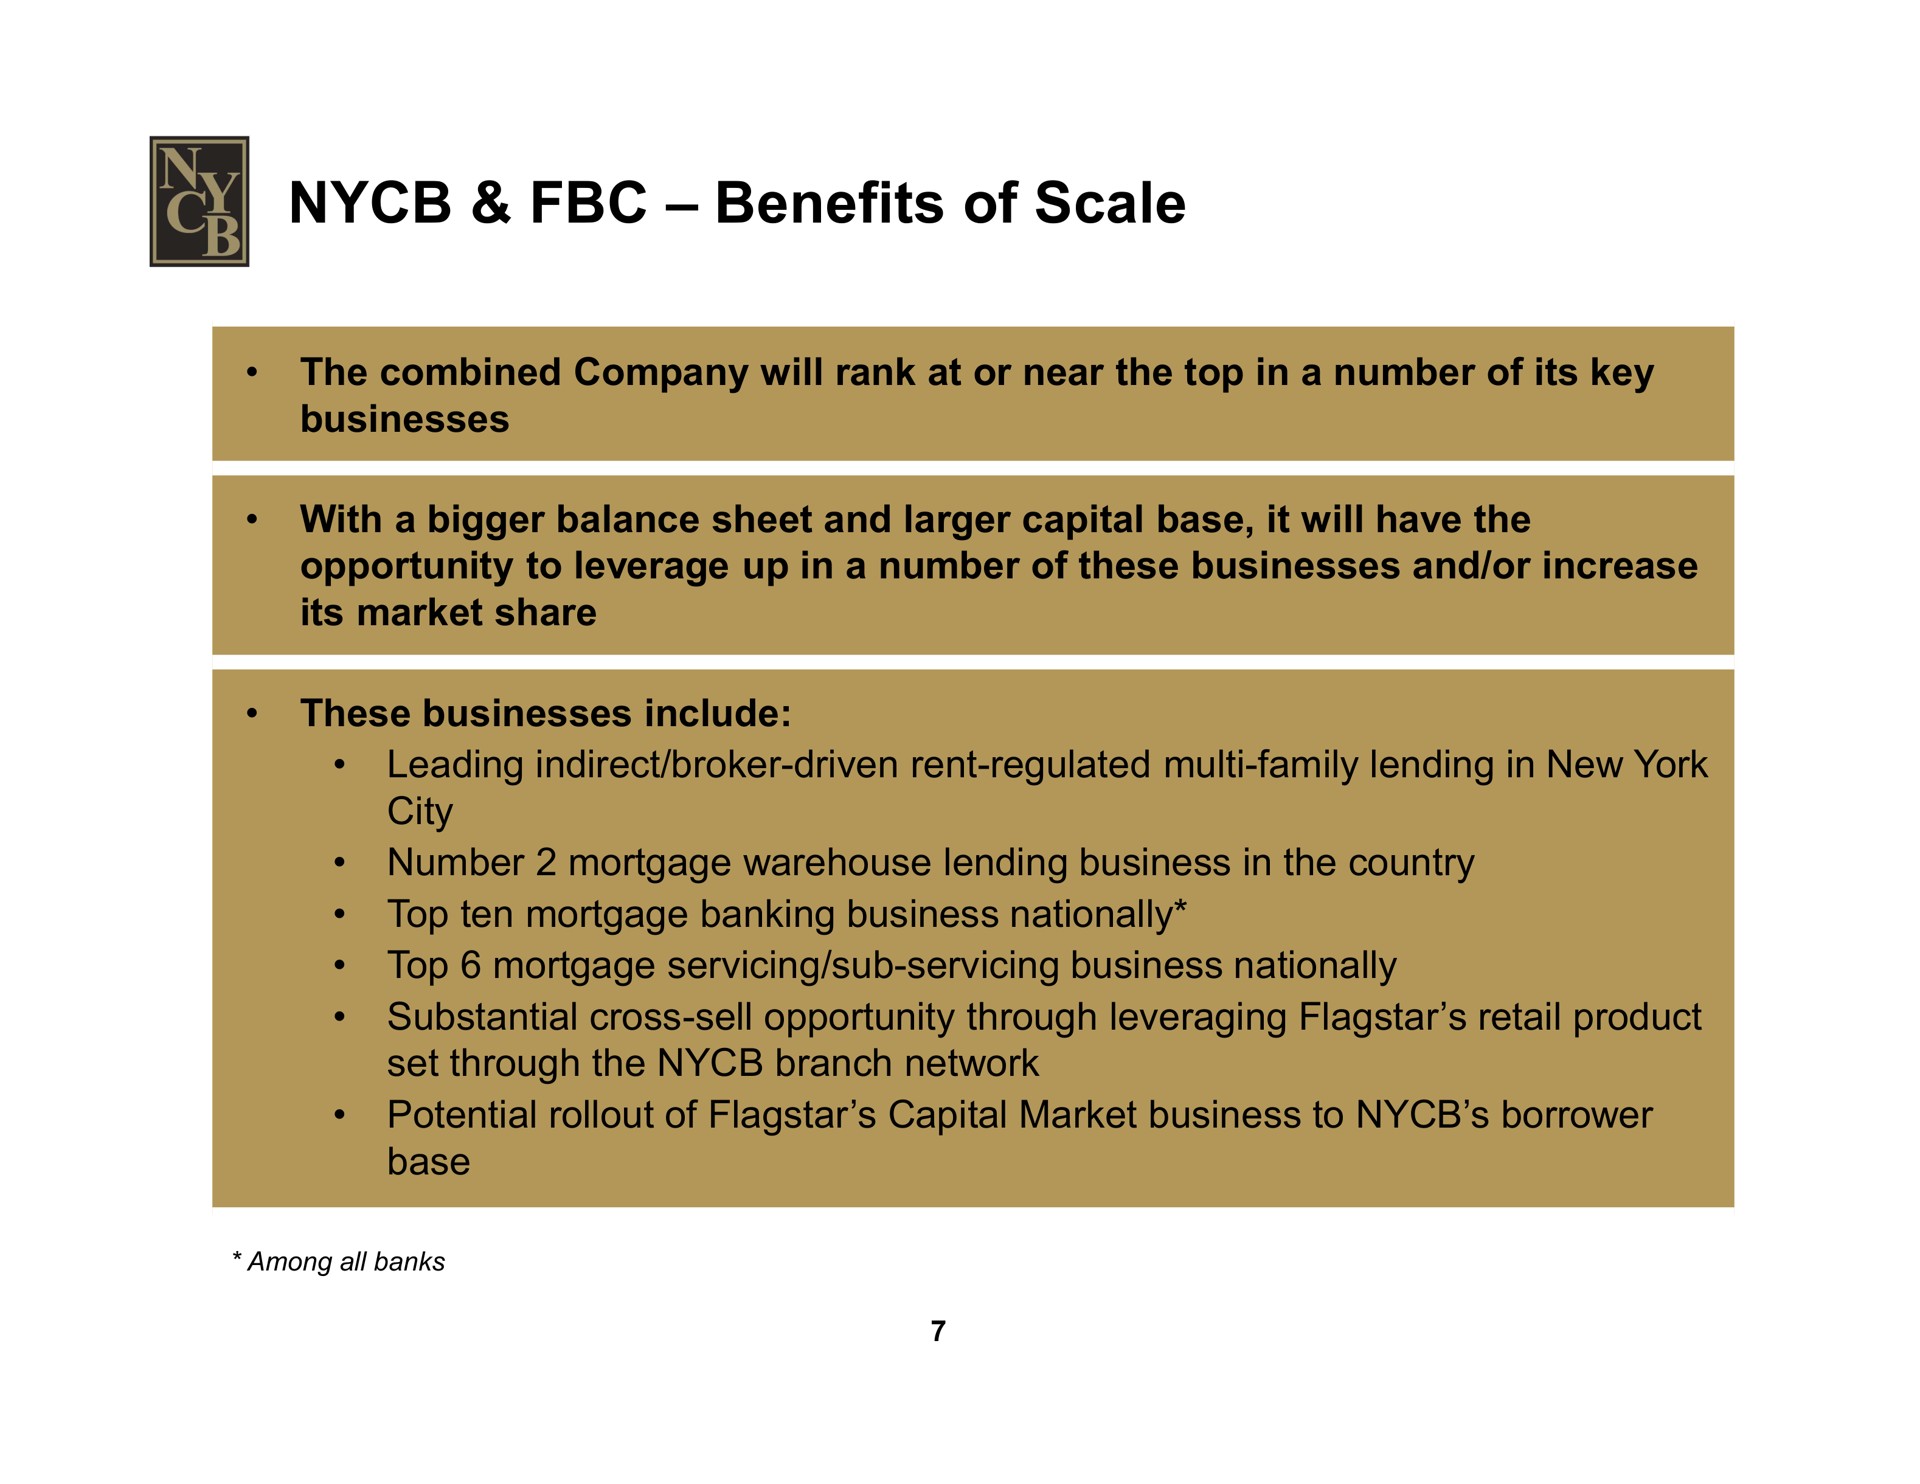 benefits of scale the combined company will rank at or near the top in a number of its key businesses with a bigger balance sheet and capital base it will have the opportunity to leverage up in a number of these businesses and or increase its market share these businesses include leading indirect broker driven rent regulated family lending in new york city number mortgage warehouse lending business in the country top ten mortgage banking business nationally top mortgage servicing sub servicing business nationally substantial cross sell opportunity through leveraging retail product set through the branch network potential of capital market business to borrower base be | New York Community Bancorp